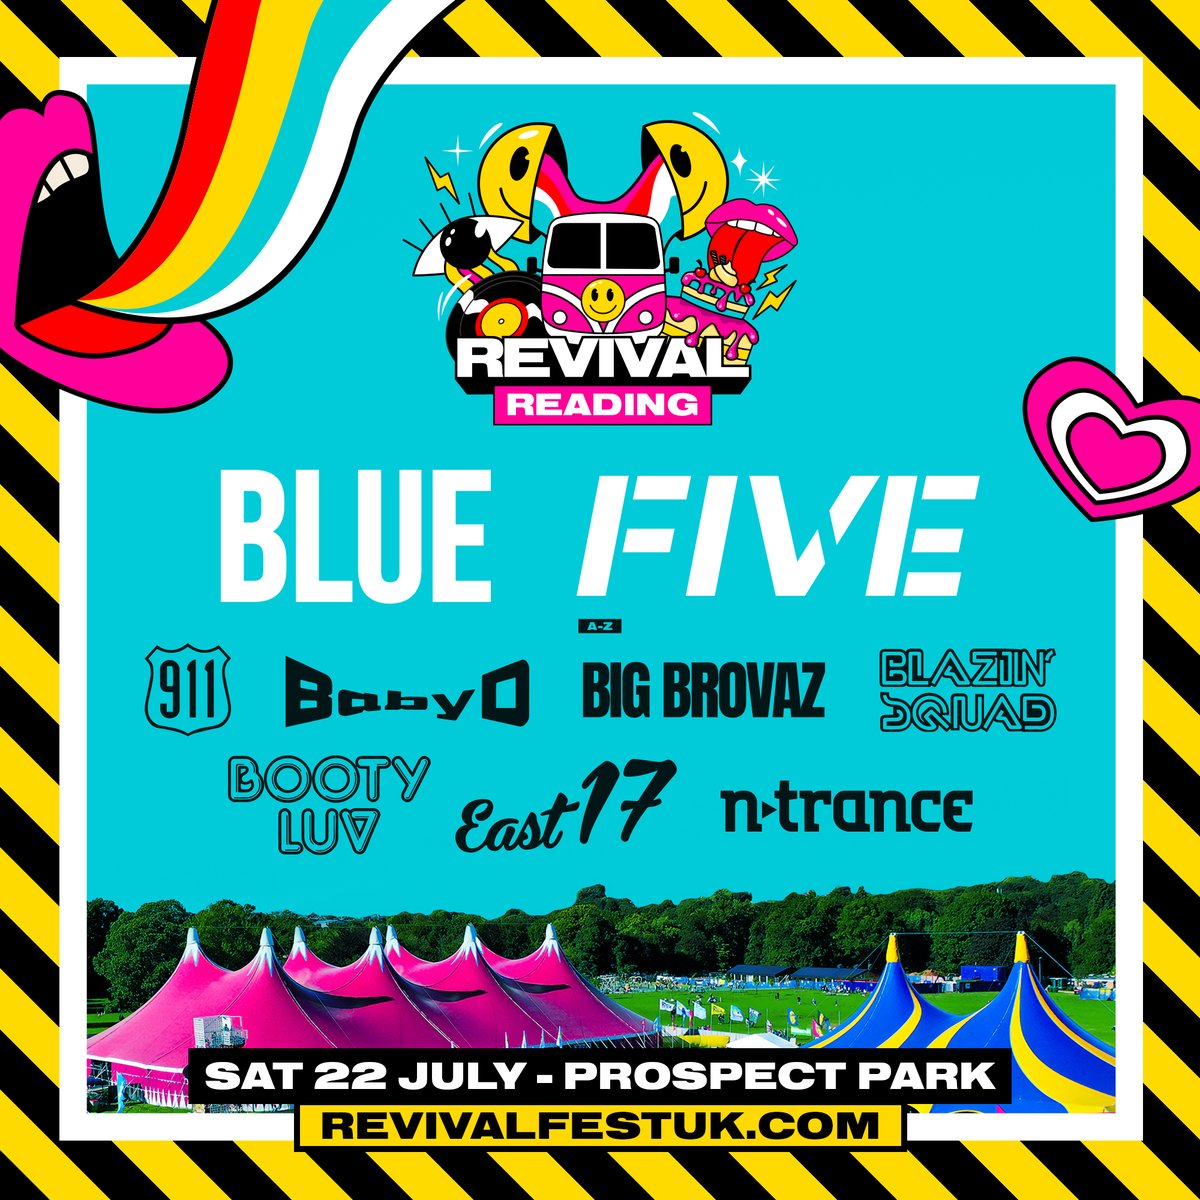 Some of the biggest names of 90s/00s pop and dance are coming to Prospect Park this summer! Join @officialblue, @itsfiveofficial, @officialeast17, @RealBigBrovaz, @BabyDofficial and more at Revival Festival on 22 July! Tickets on sale now: whatsonreading.com/venues/reading…